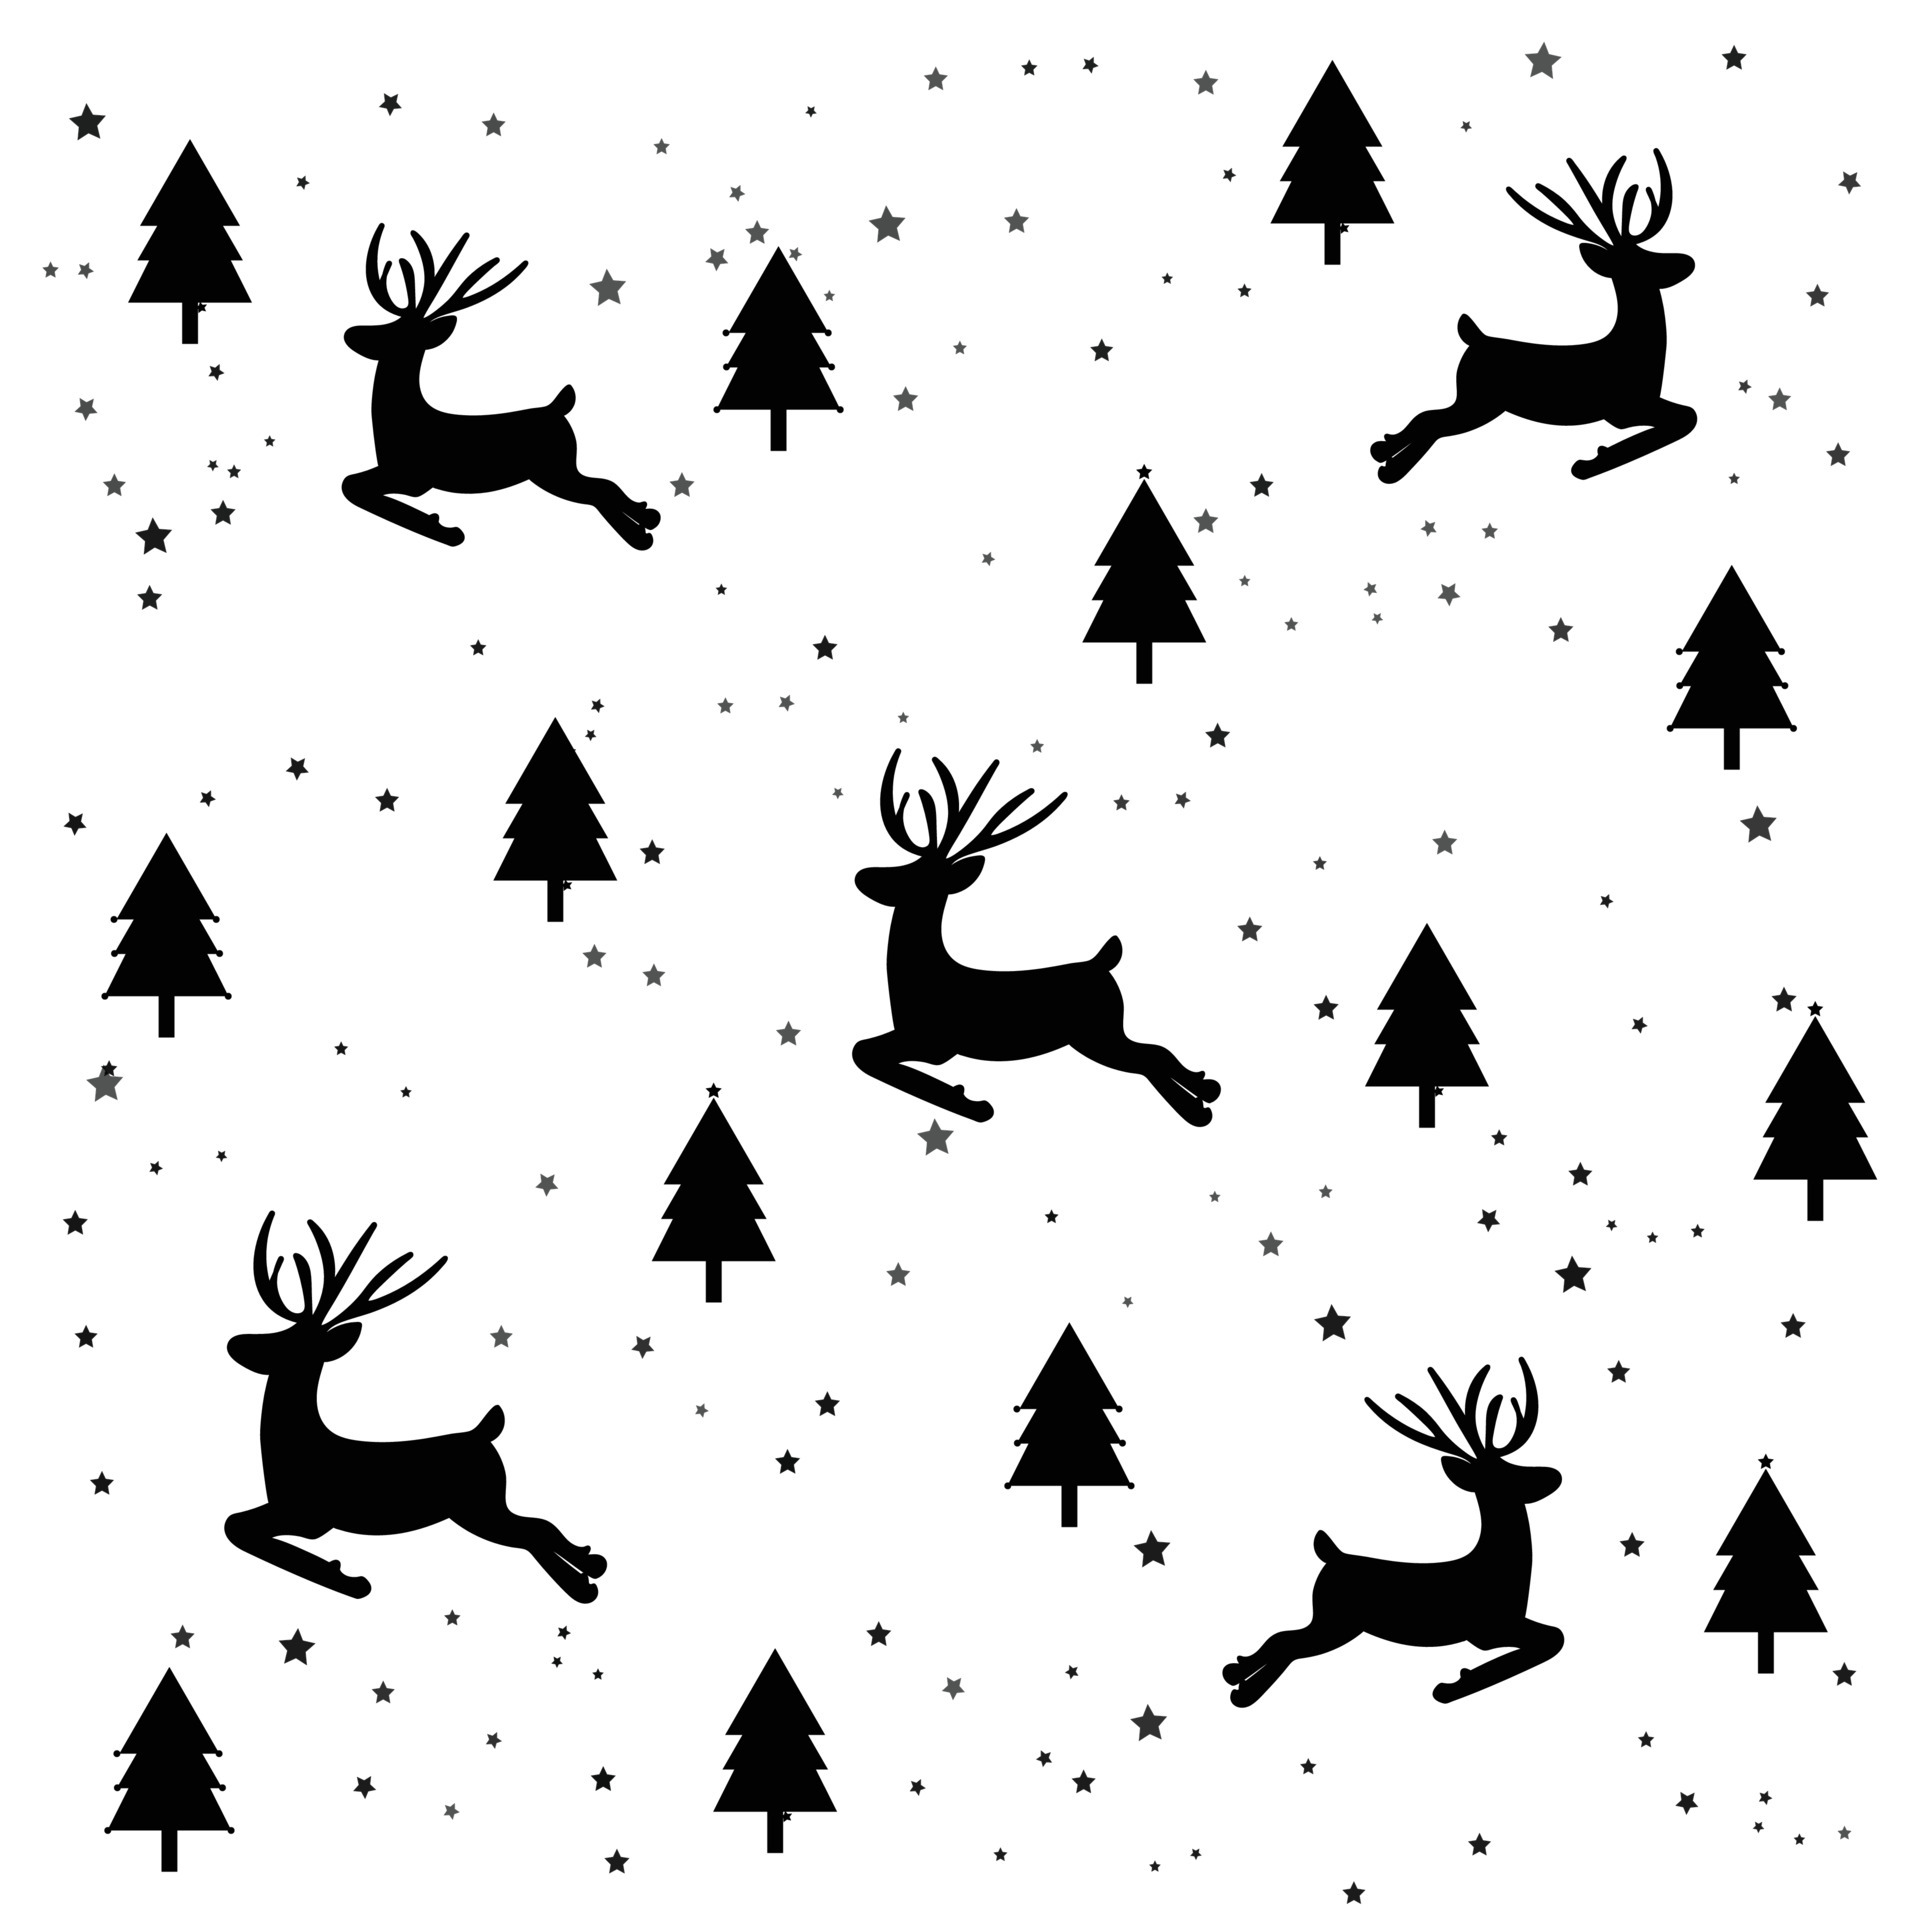 Christmas pattern reindeer and snowflakes and Christmas tree winter holiday wallpaper for design black and white illustration